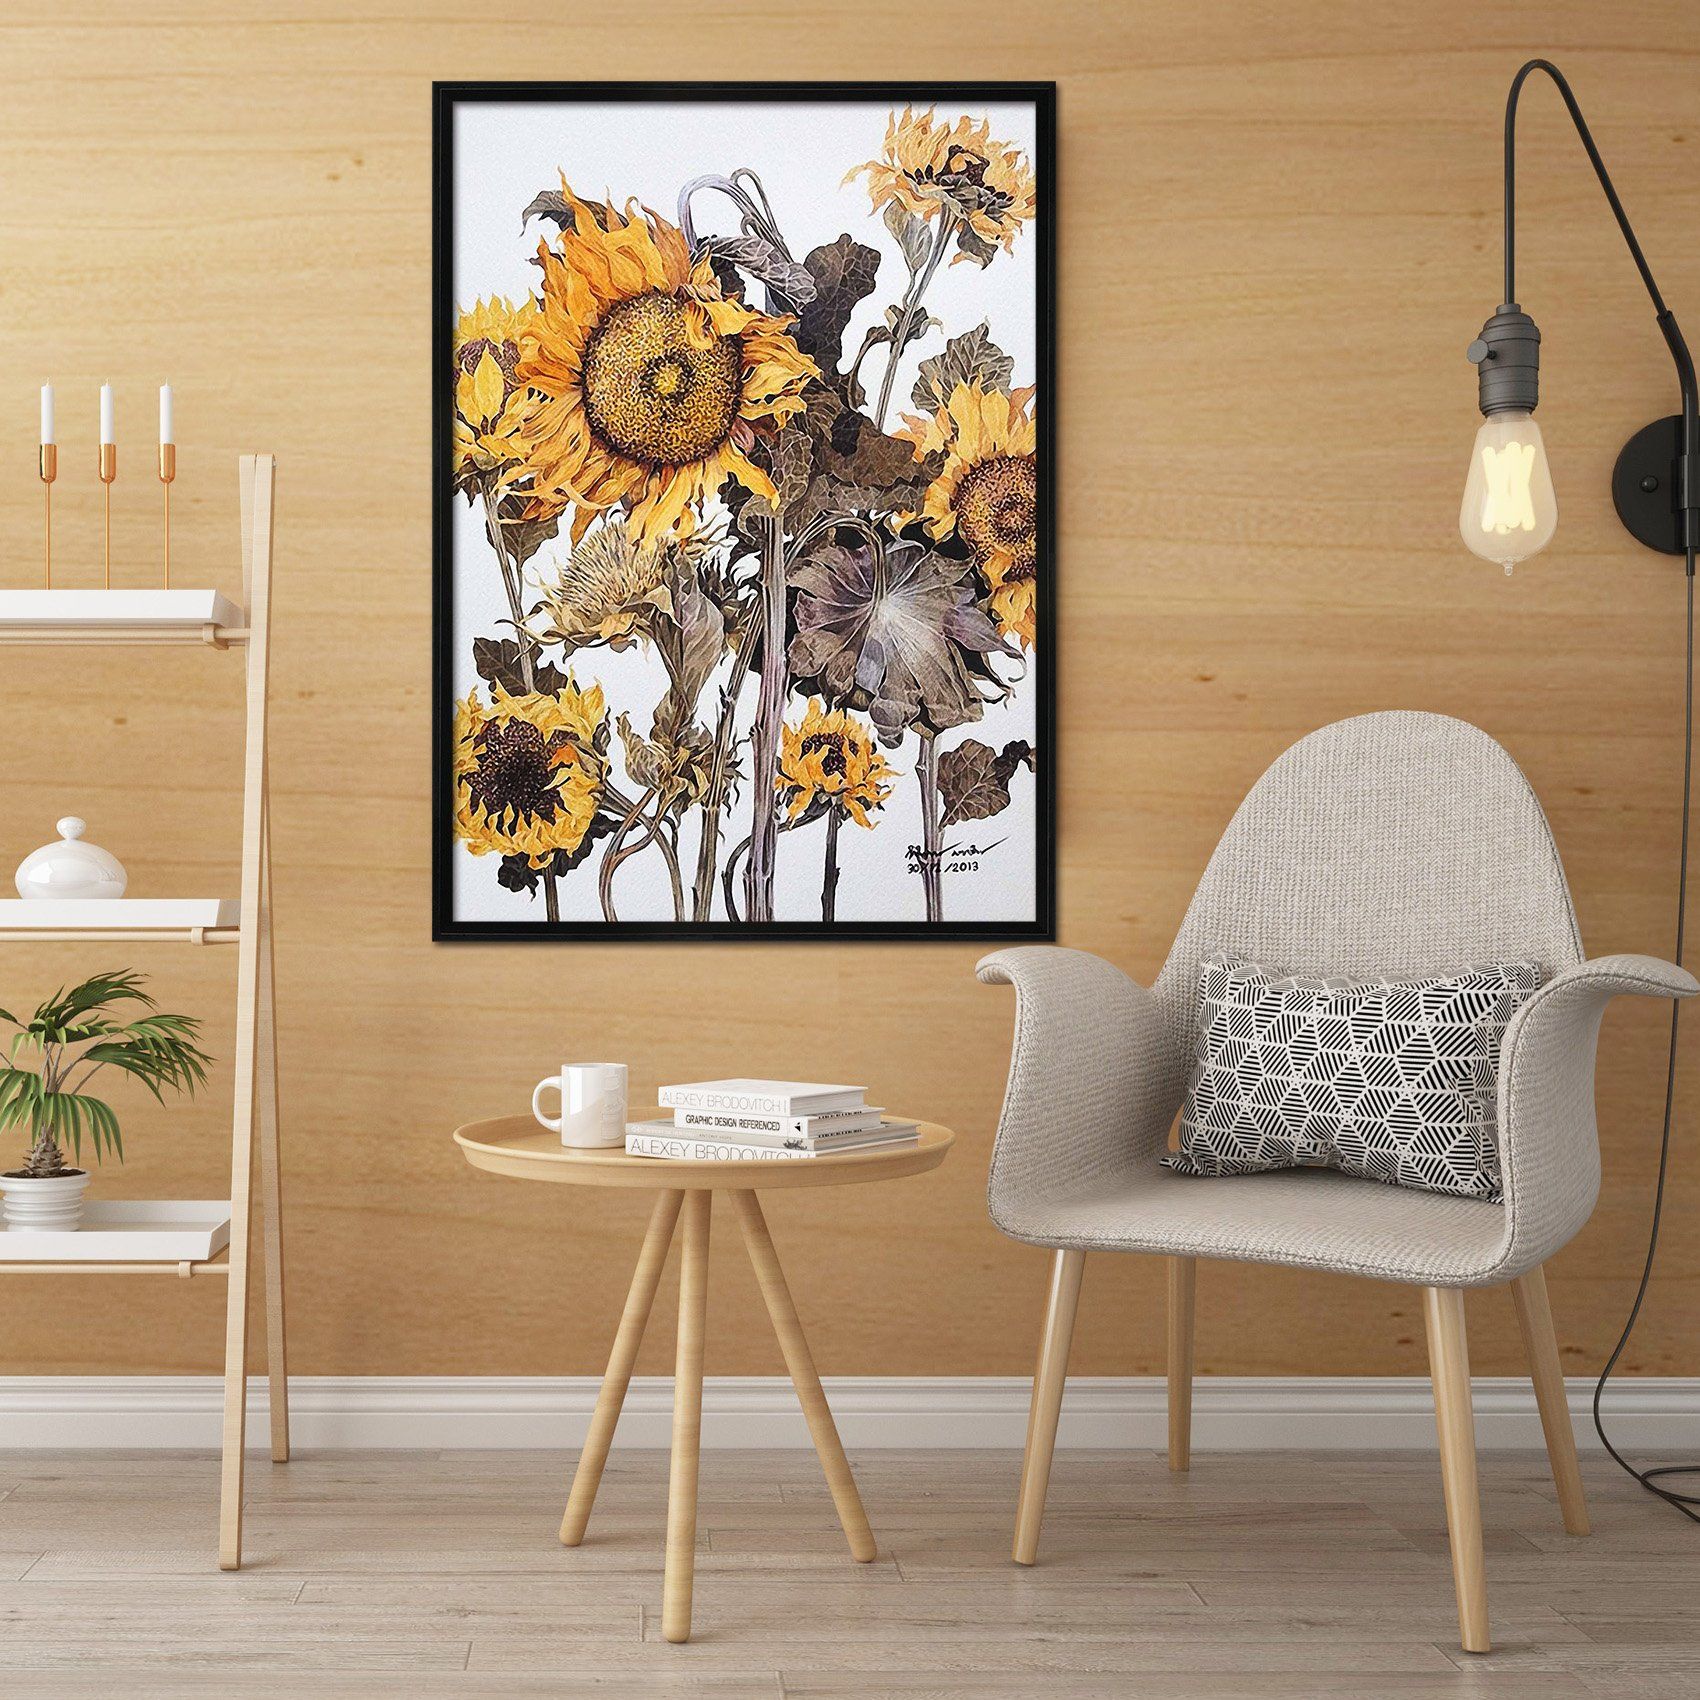 3D Withering Sunflower 091 Fake Framed Print Painting Wallpaper AJ Creativity Home 